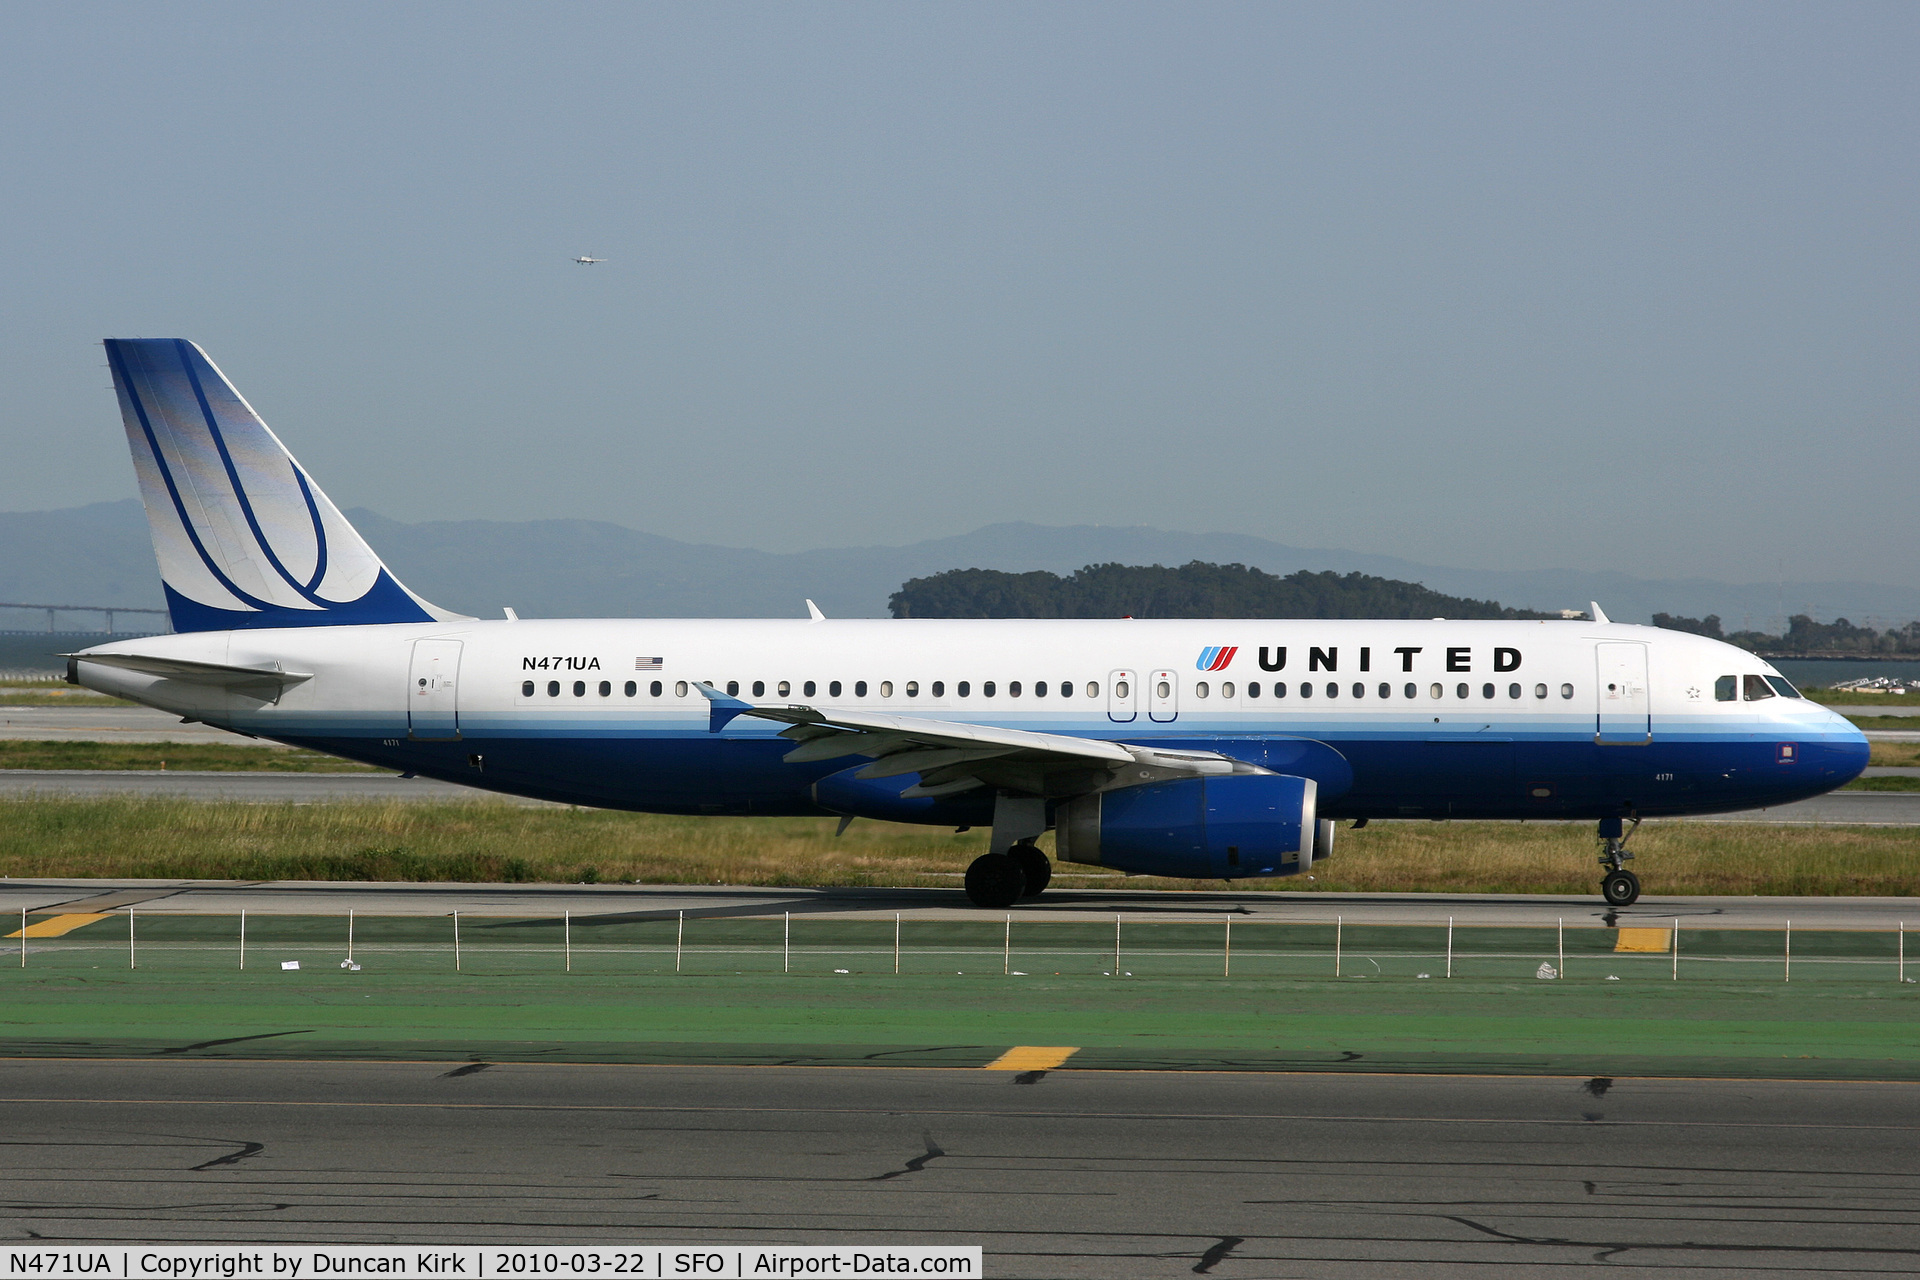 N471UA, 2001 Airbus A320-232 C/N 1432, Another UA Bus departure